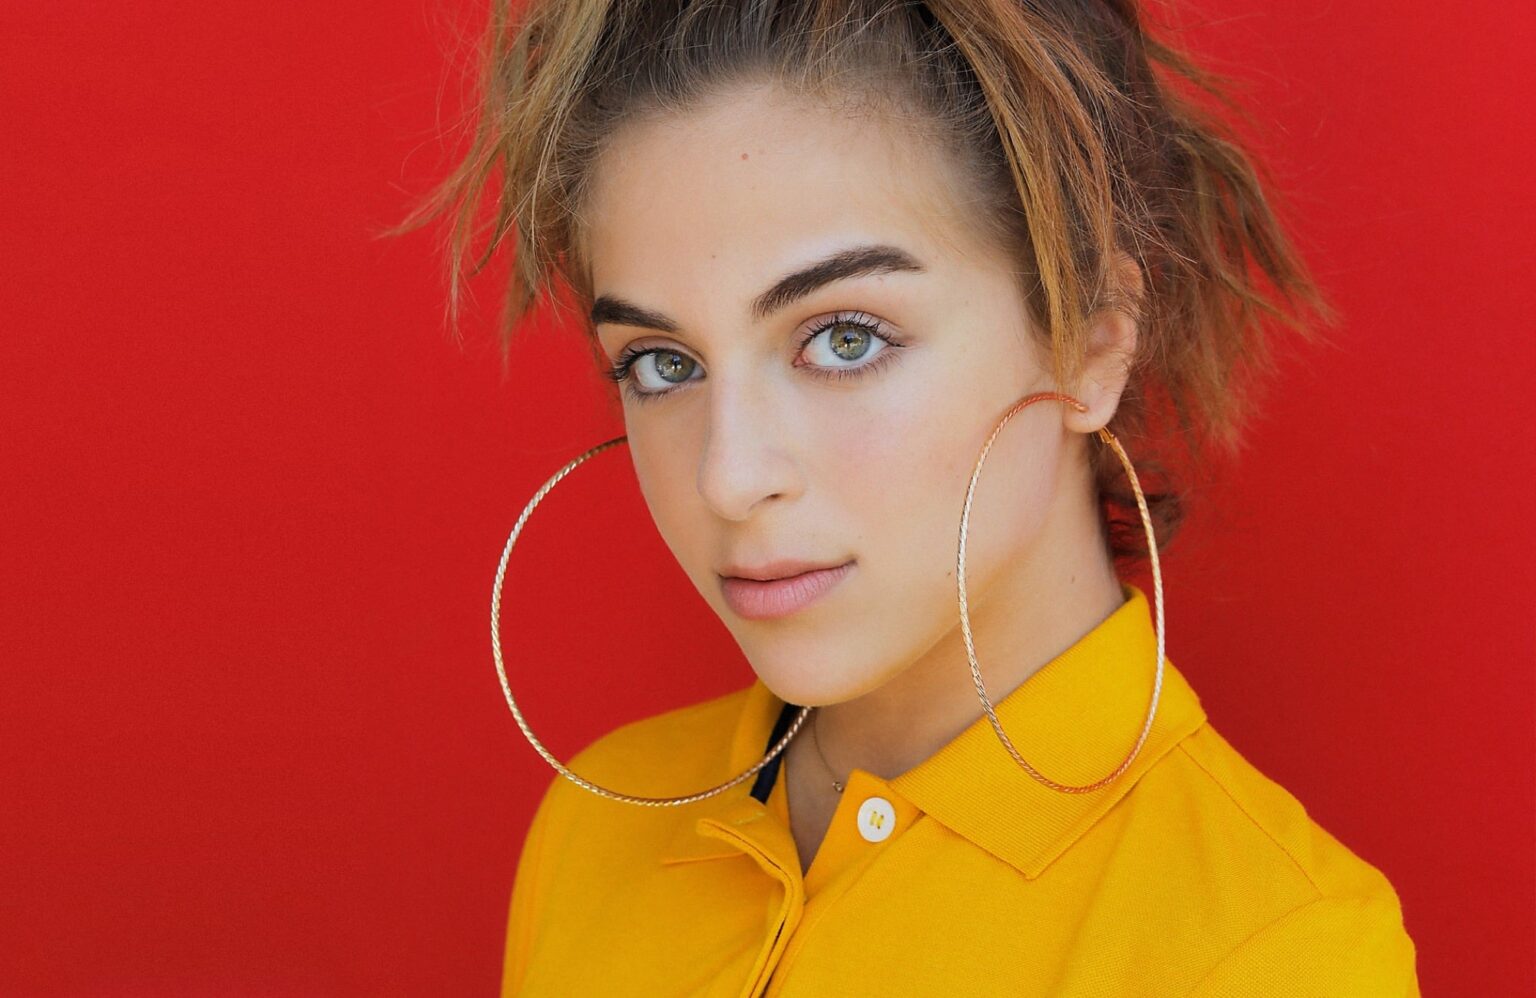 Baby Ariel is the latest person to blow up on TikTok. Here’s what you need to know about the social media star.